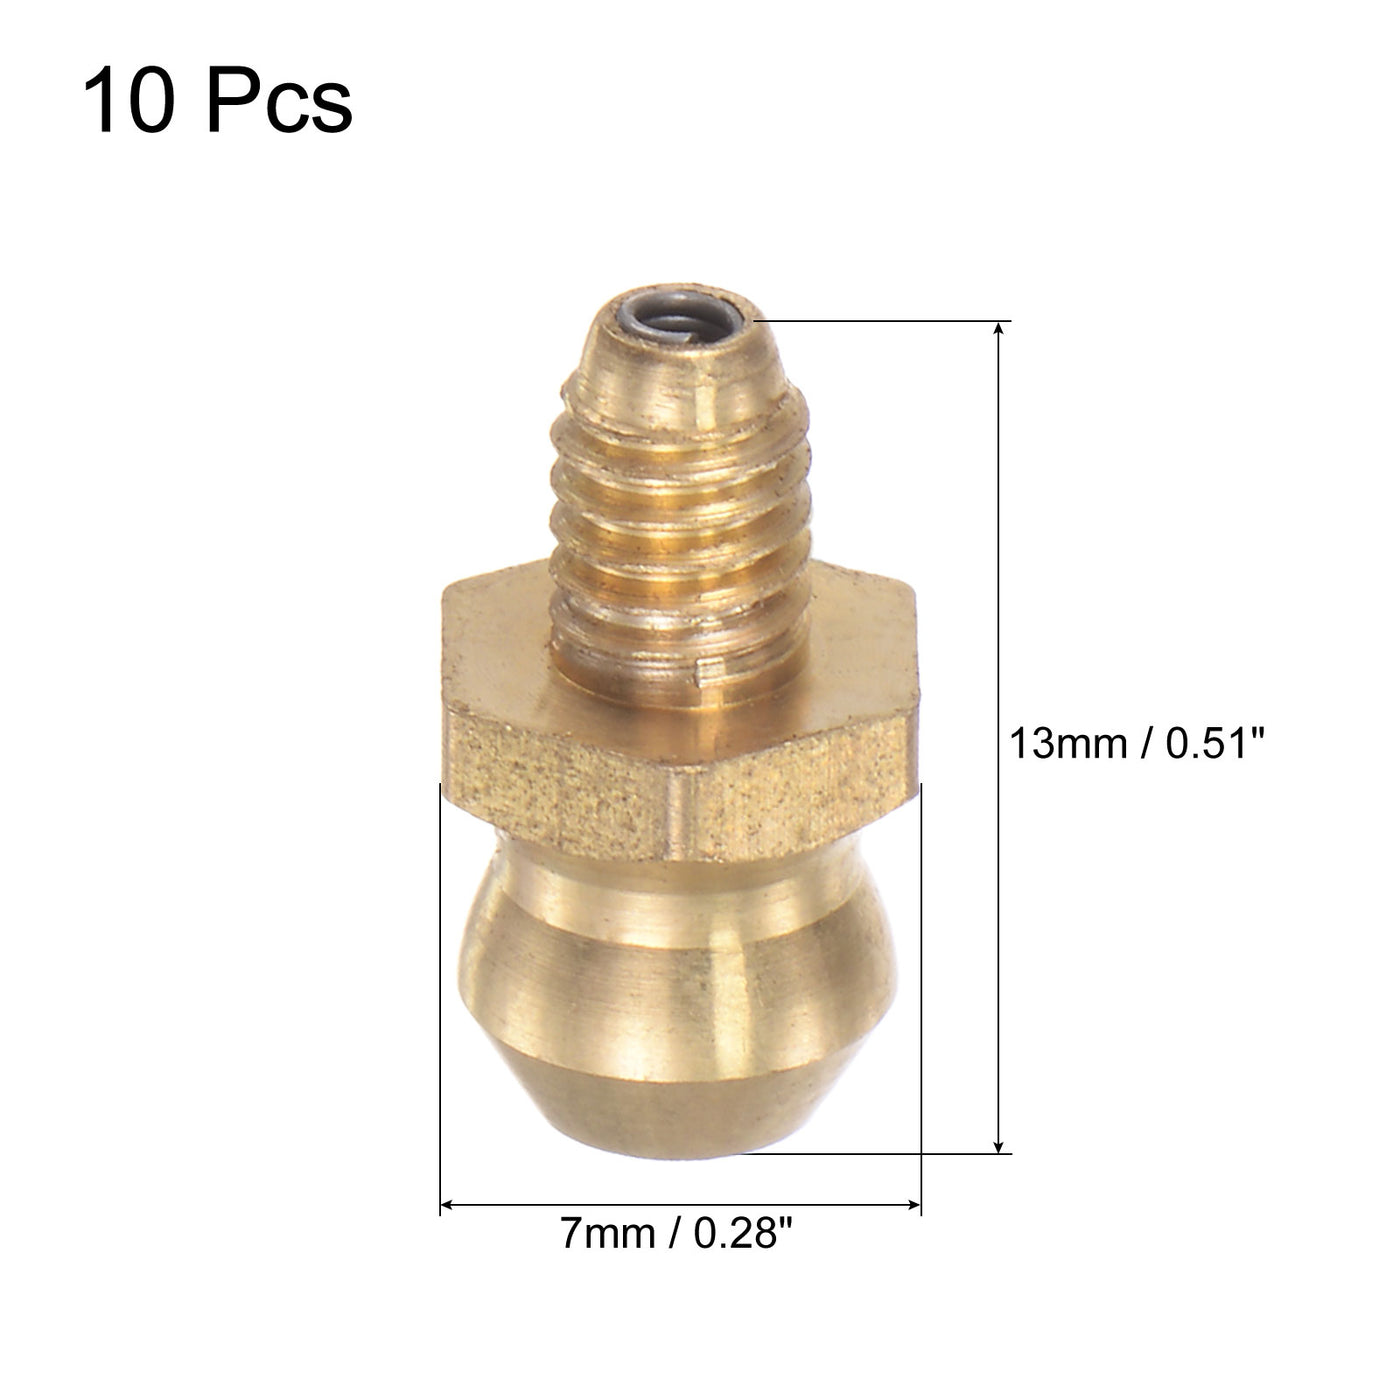 uxcell Uxcell Brass Straight Hydraulic Grease Fitting Accessories M4 x 0.7mm Thread, 10Pcs